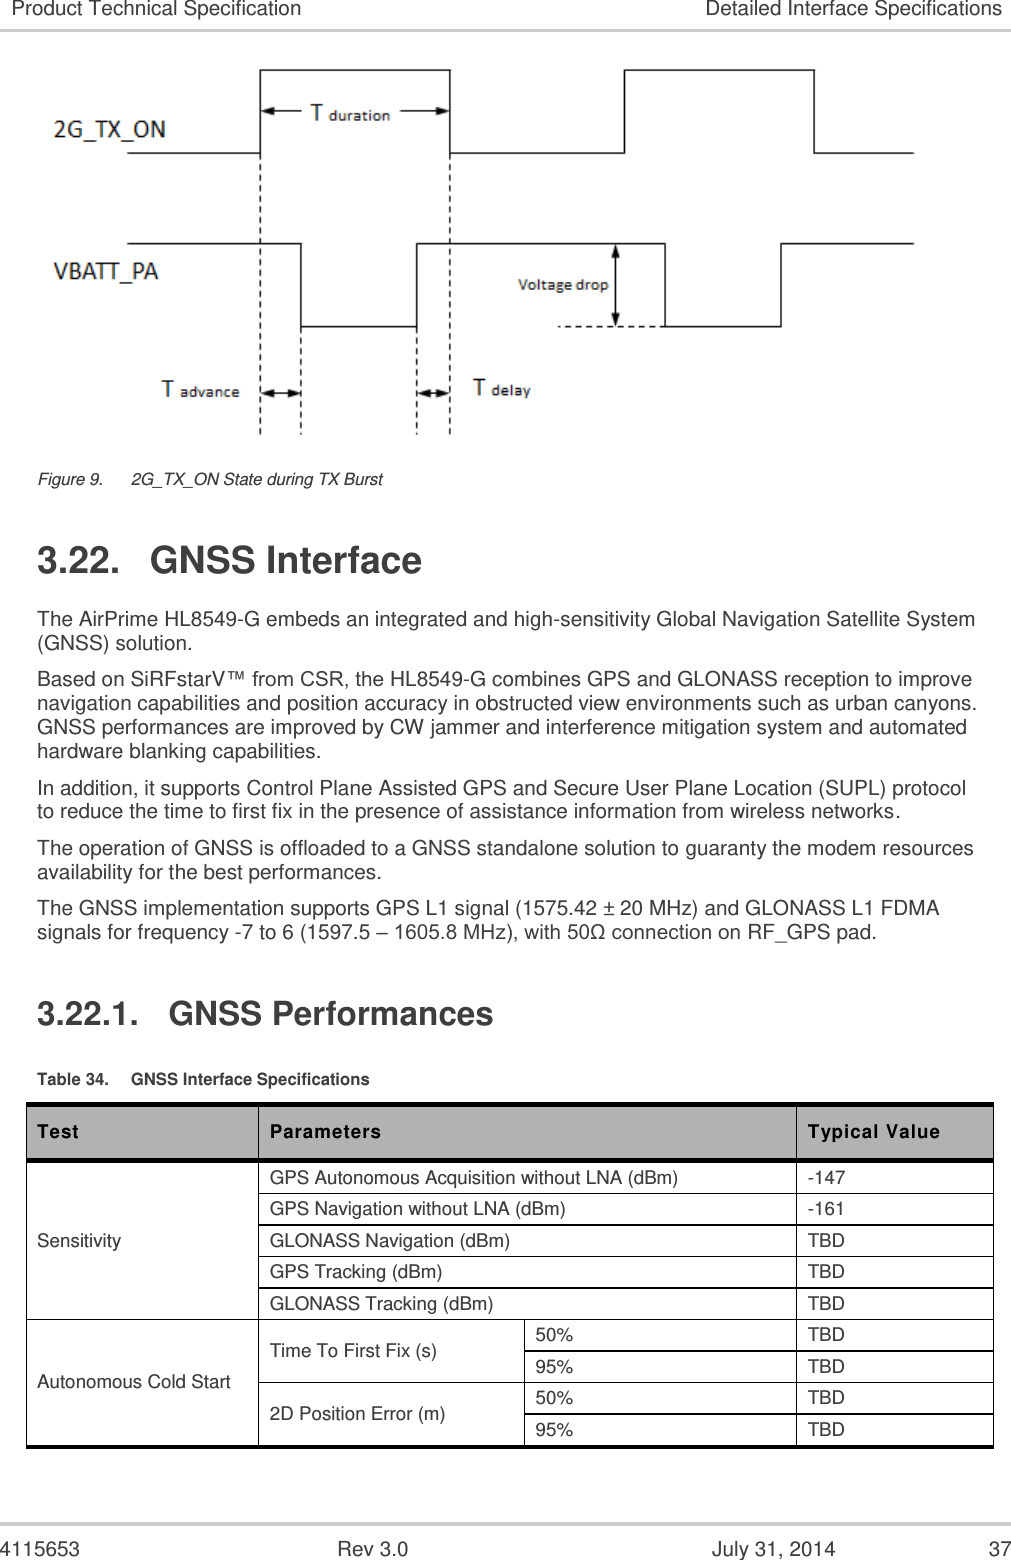  4115653  Rev 3.0  July 31, 2014  37 Product Technical Specification Detailed Interface Specifications  Figure 9.  2G_TX_ON State during TX Burst 3.22.  GNSS Interface The AirPrime HL8549-G embeds an integrated and high-sensitivity Global Navigation Satellite System (GNSS) solution. Based on SiRFstarV™ from CSR, the HL8549-G combines GPS and GLONASS reception to improve navigation capabilities and position accuracy in obstructed view environments such as urban canyons. GNSS performances are improved by CW jammer and interference mitigation system and automated hardware blanking capabilities. In addition, it supports Control Plane Assisted GPS and Secure User Plane Location (SUPL) protocol to reduce the time to first fix in the presence of assistance information from wireless networks. The operation of GNSS is offloaded to a GNSS standalone solution to guaranty the modem resources availability for the best performances. The GNSS implementation supports GPS L1 signal (1575.42 ± 20 MHz) and GLONASS L1 FDMA signals for frequency -7 to 6 (1597.5 – 1605.8 MHz), with 50Ω connection on RF_GPS pad. 3.22.1.  GNSS Performances Table 34.  GNSS Interface Specifications Test Parameters Typical Value Sensitivity GPS Autonomous Acquisition without LNA (dBm) -147 GPS Navigation without LNA (dBm) -161 GLONASS Navigation (dBm) TBD GPS Tracking (dBm) TBD GLONASS Tracking (dBm) TBD Autonomous Cold Start  Time To First Fix (s) 50% TBD 95% TBD 2D Position Error (m) 50% TBD 95% TBD 